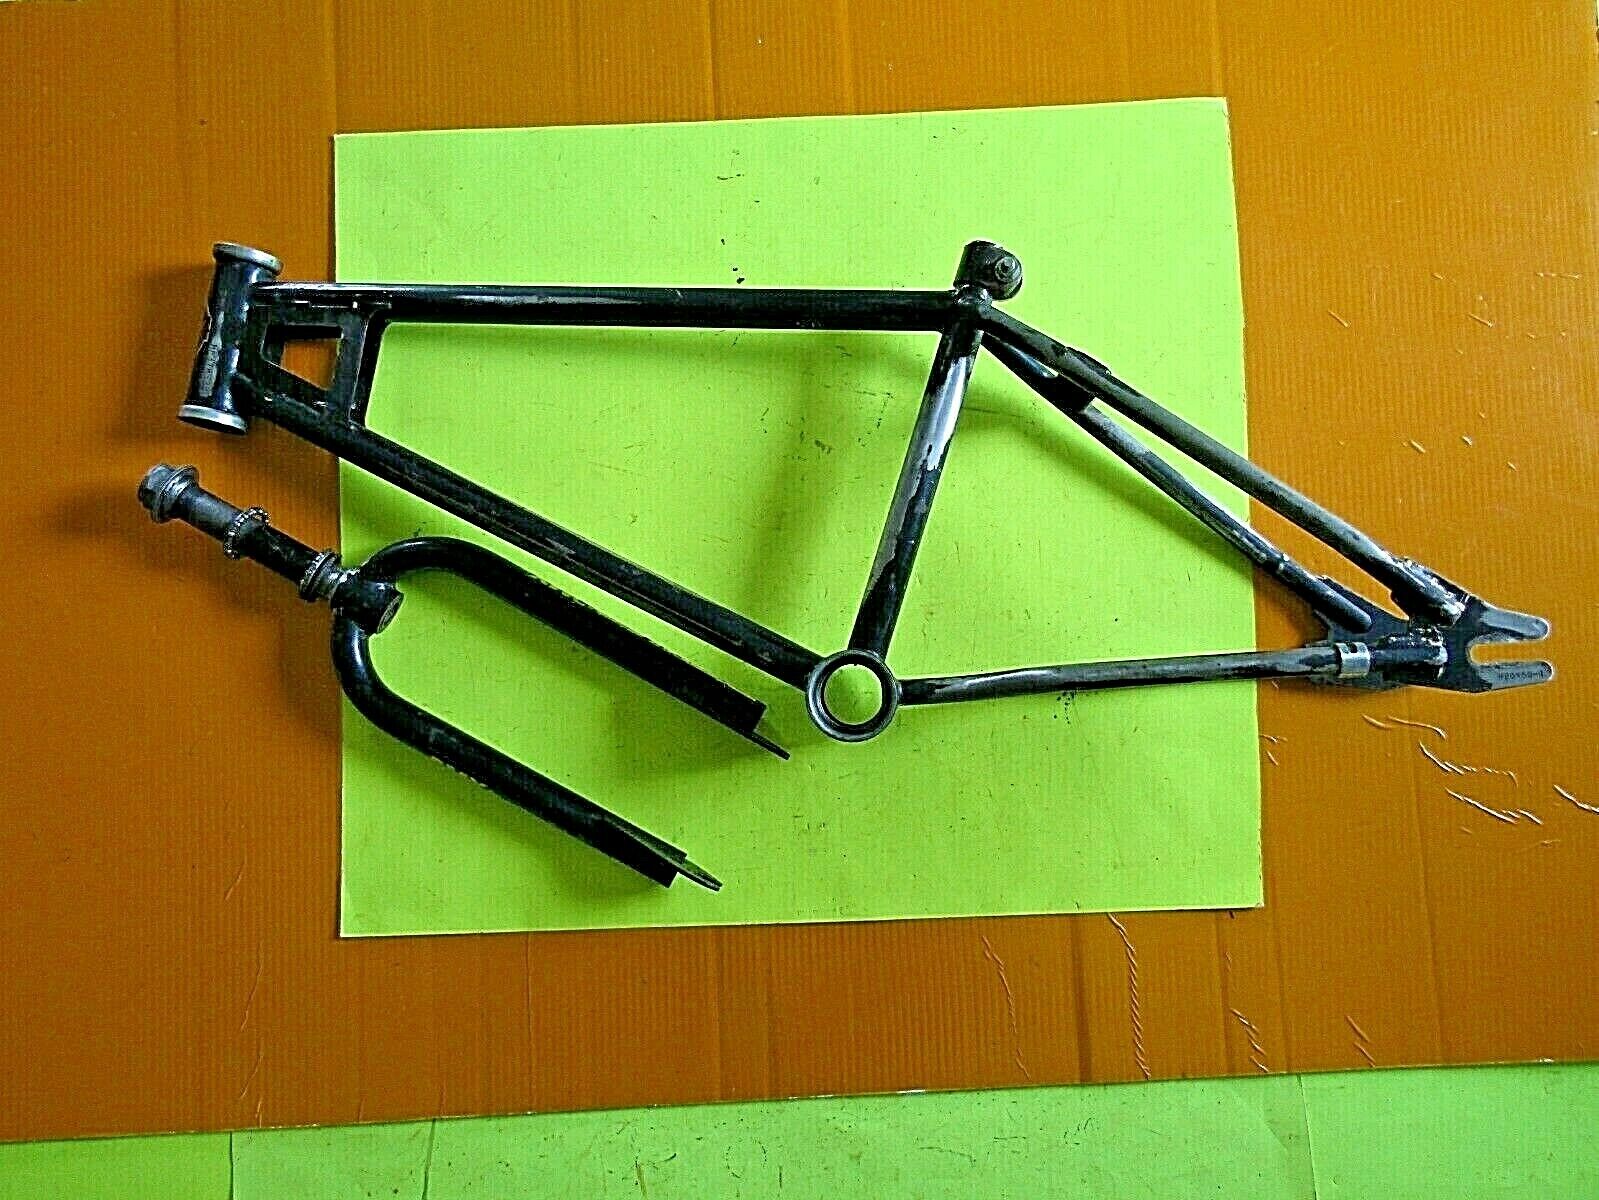 USED 1983 HUFFY PRO THUNDER BMX BICYCLE FRAME & FORK WITH DAMAGE, PARTS/REPAIR